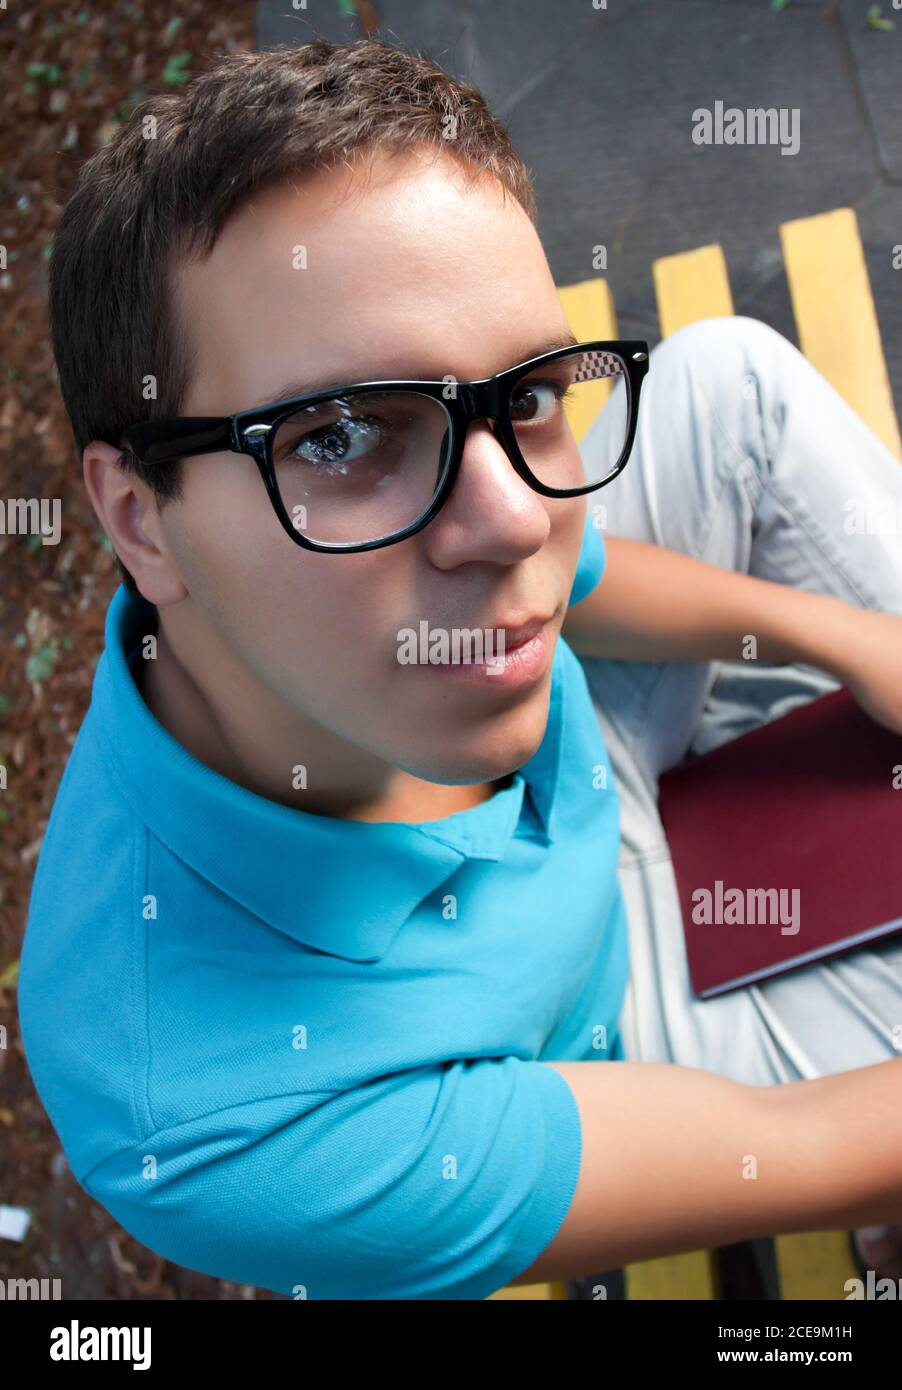 wide angle portrait of young man in glasses Stock Photo